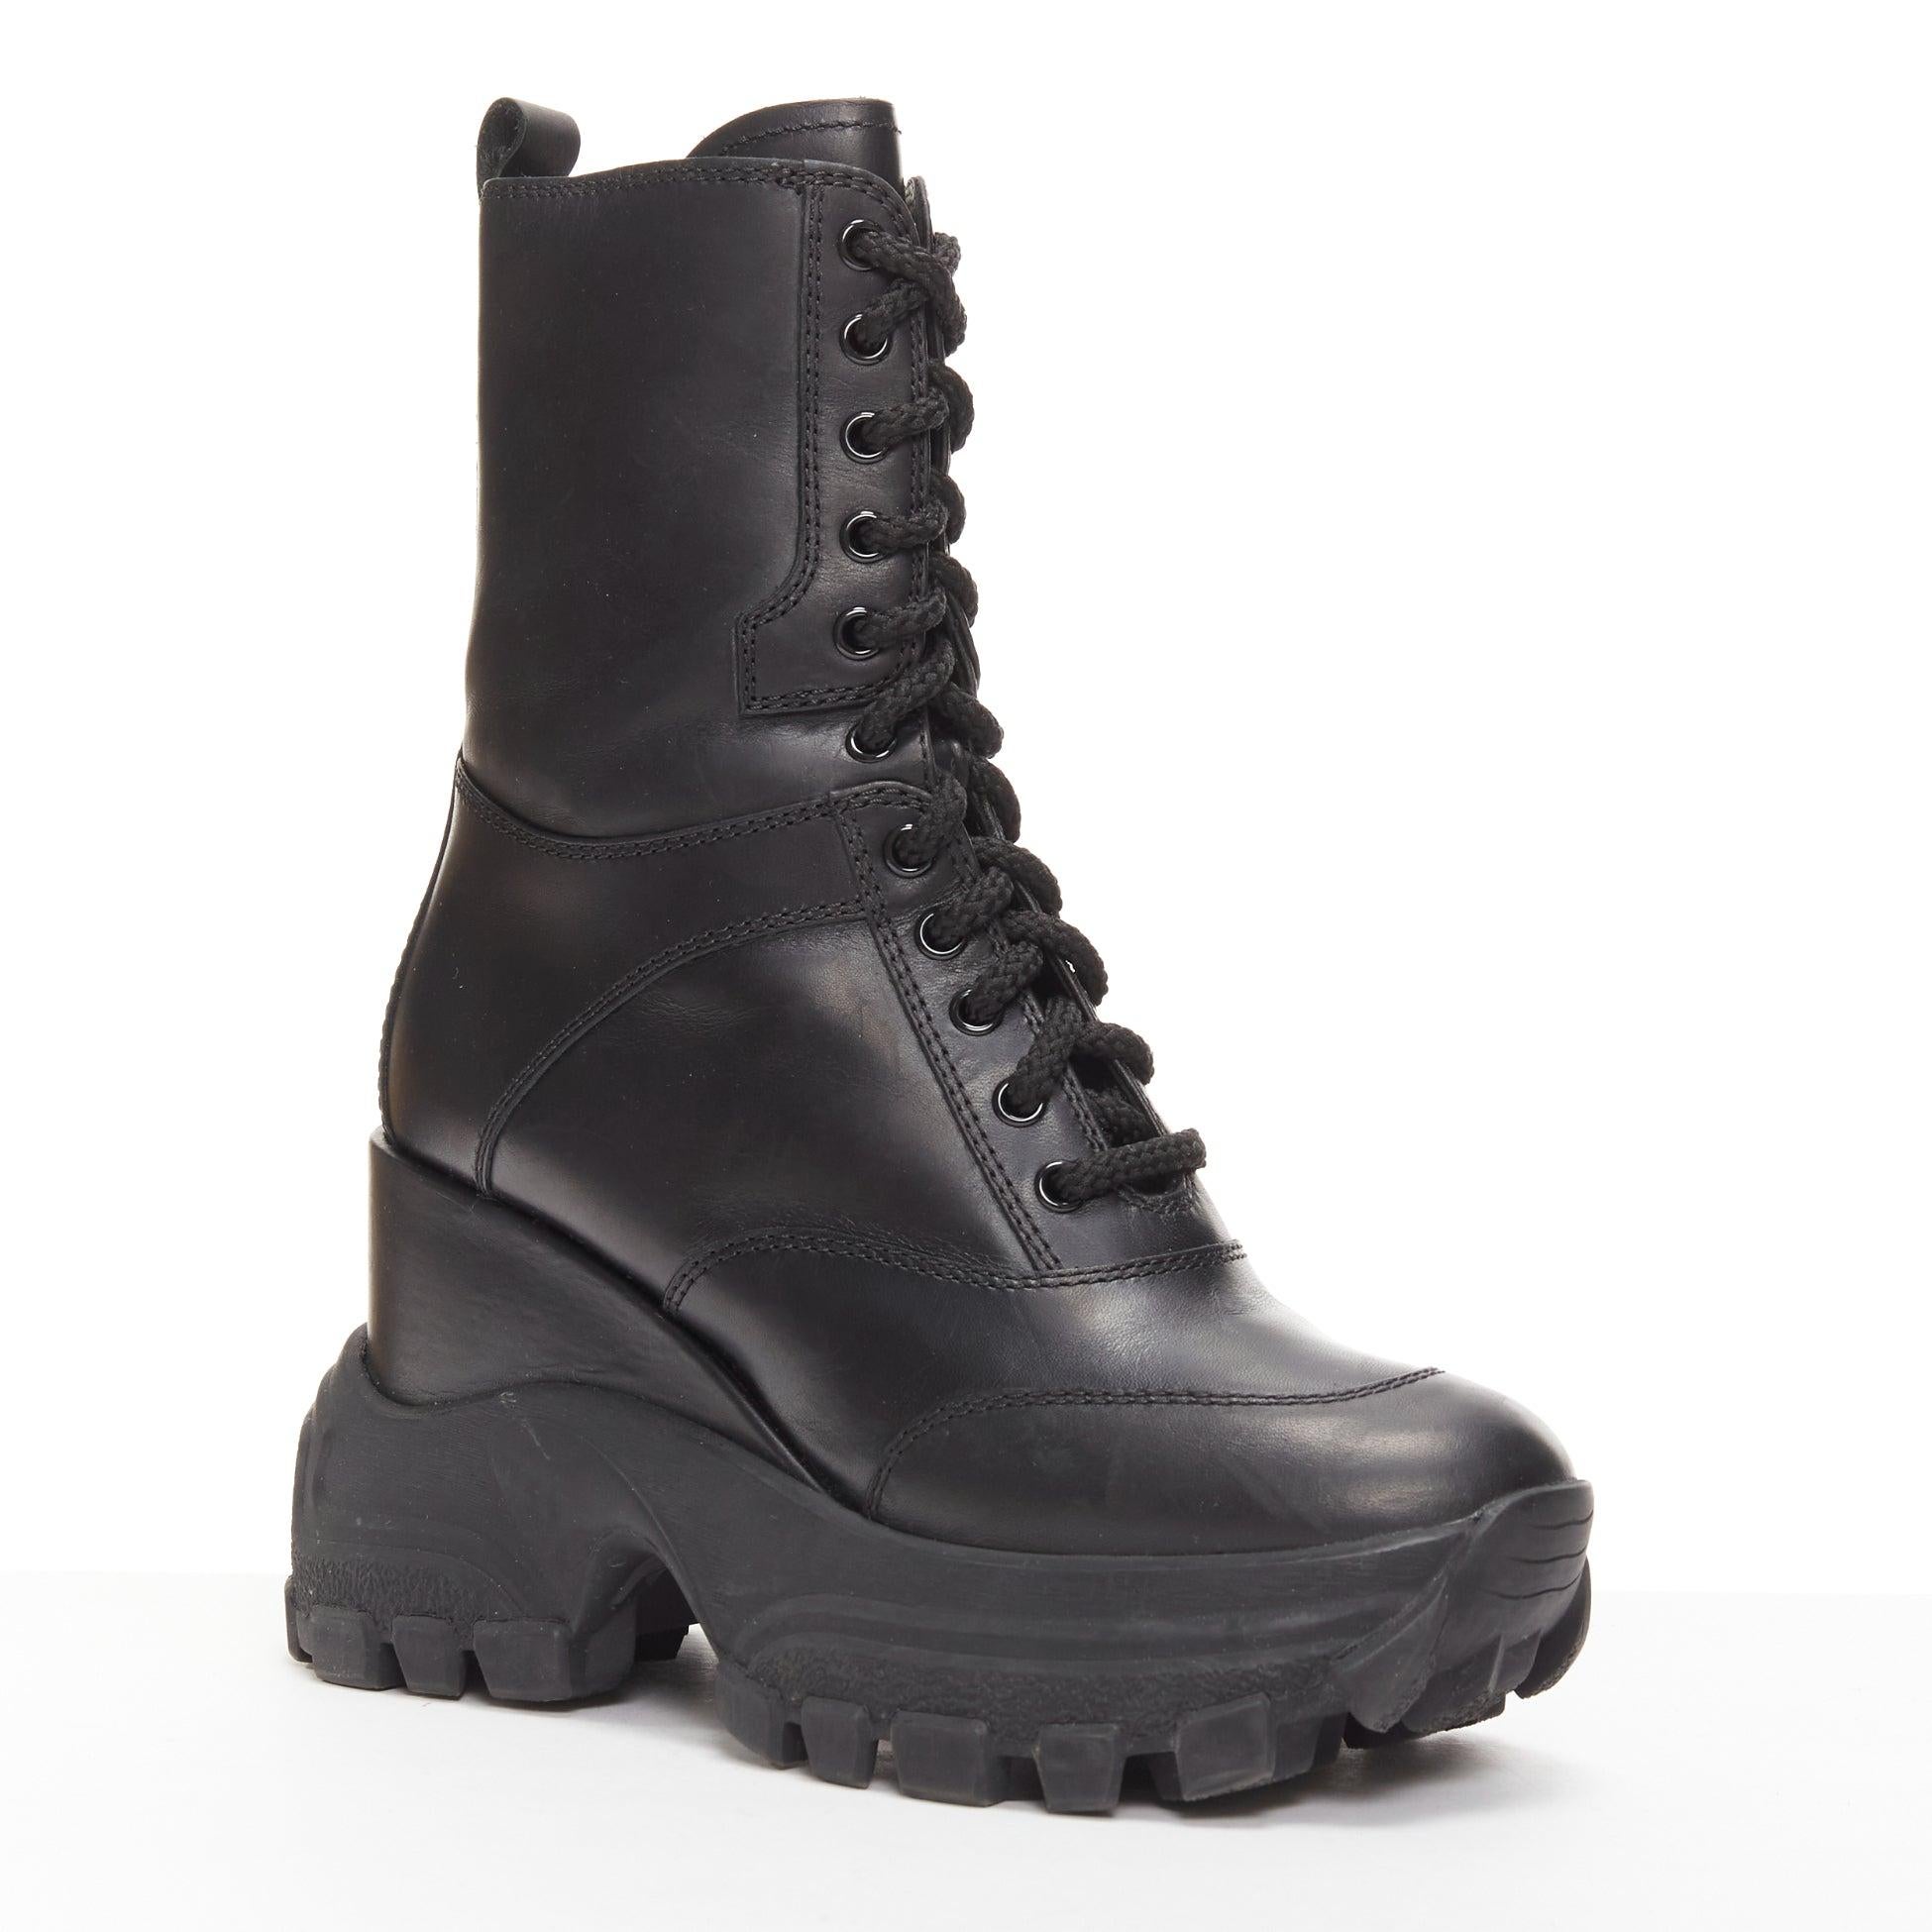 MIU MIU Runway black leather logo lace up chunky wedged military boots EU39
Reference: AAWC/A00953
Brand: Miu Miu
Designer: Miuccia Prada
Collection: Runway
Material: Leather
Color: Black, Silver
Pattern: Solid
Closure: Zip
Lining: Black